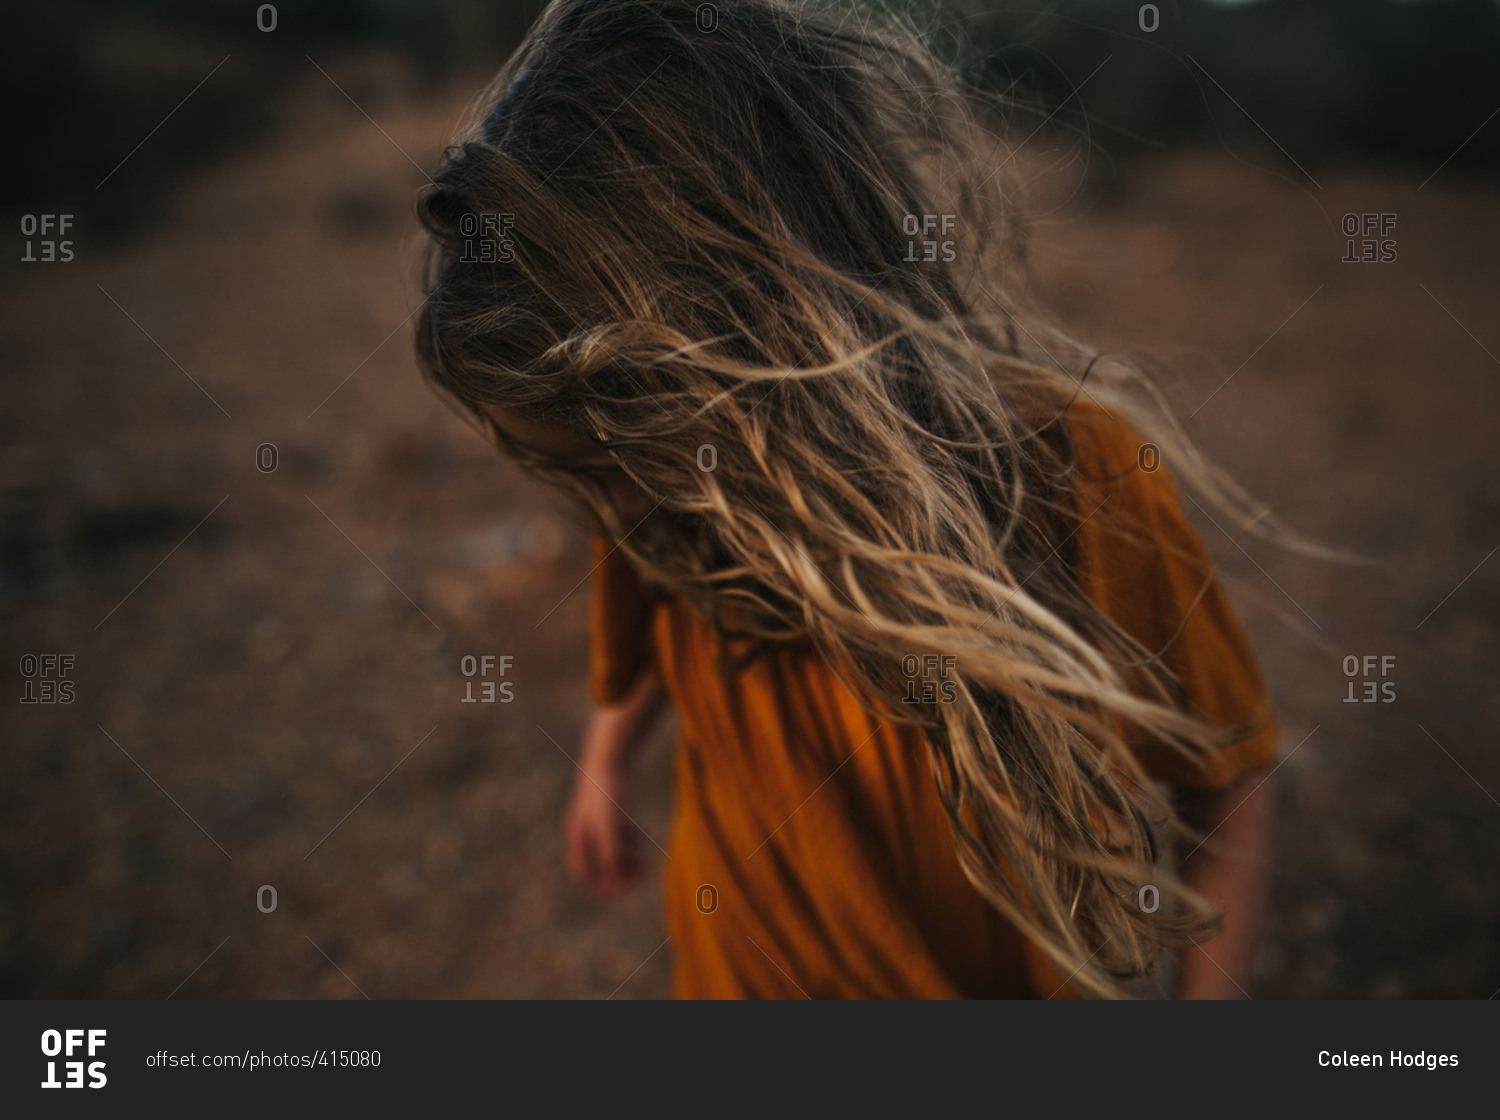 Girl with hair covering her face stock photo - OFFSET